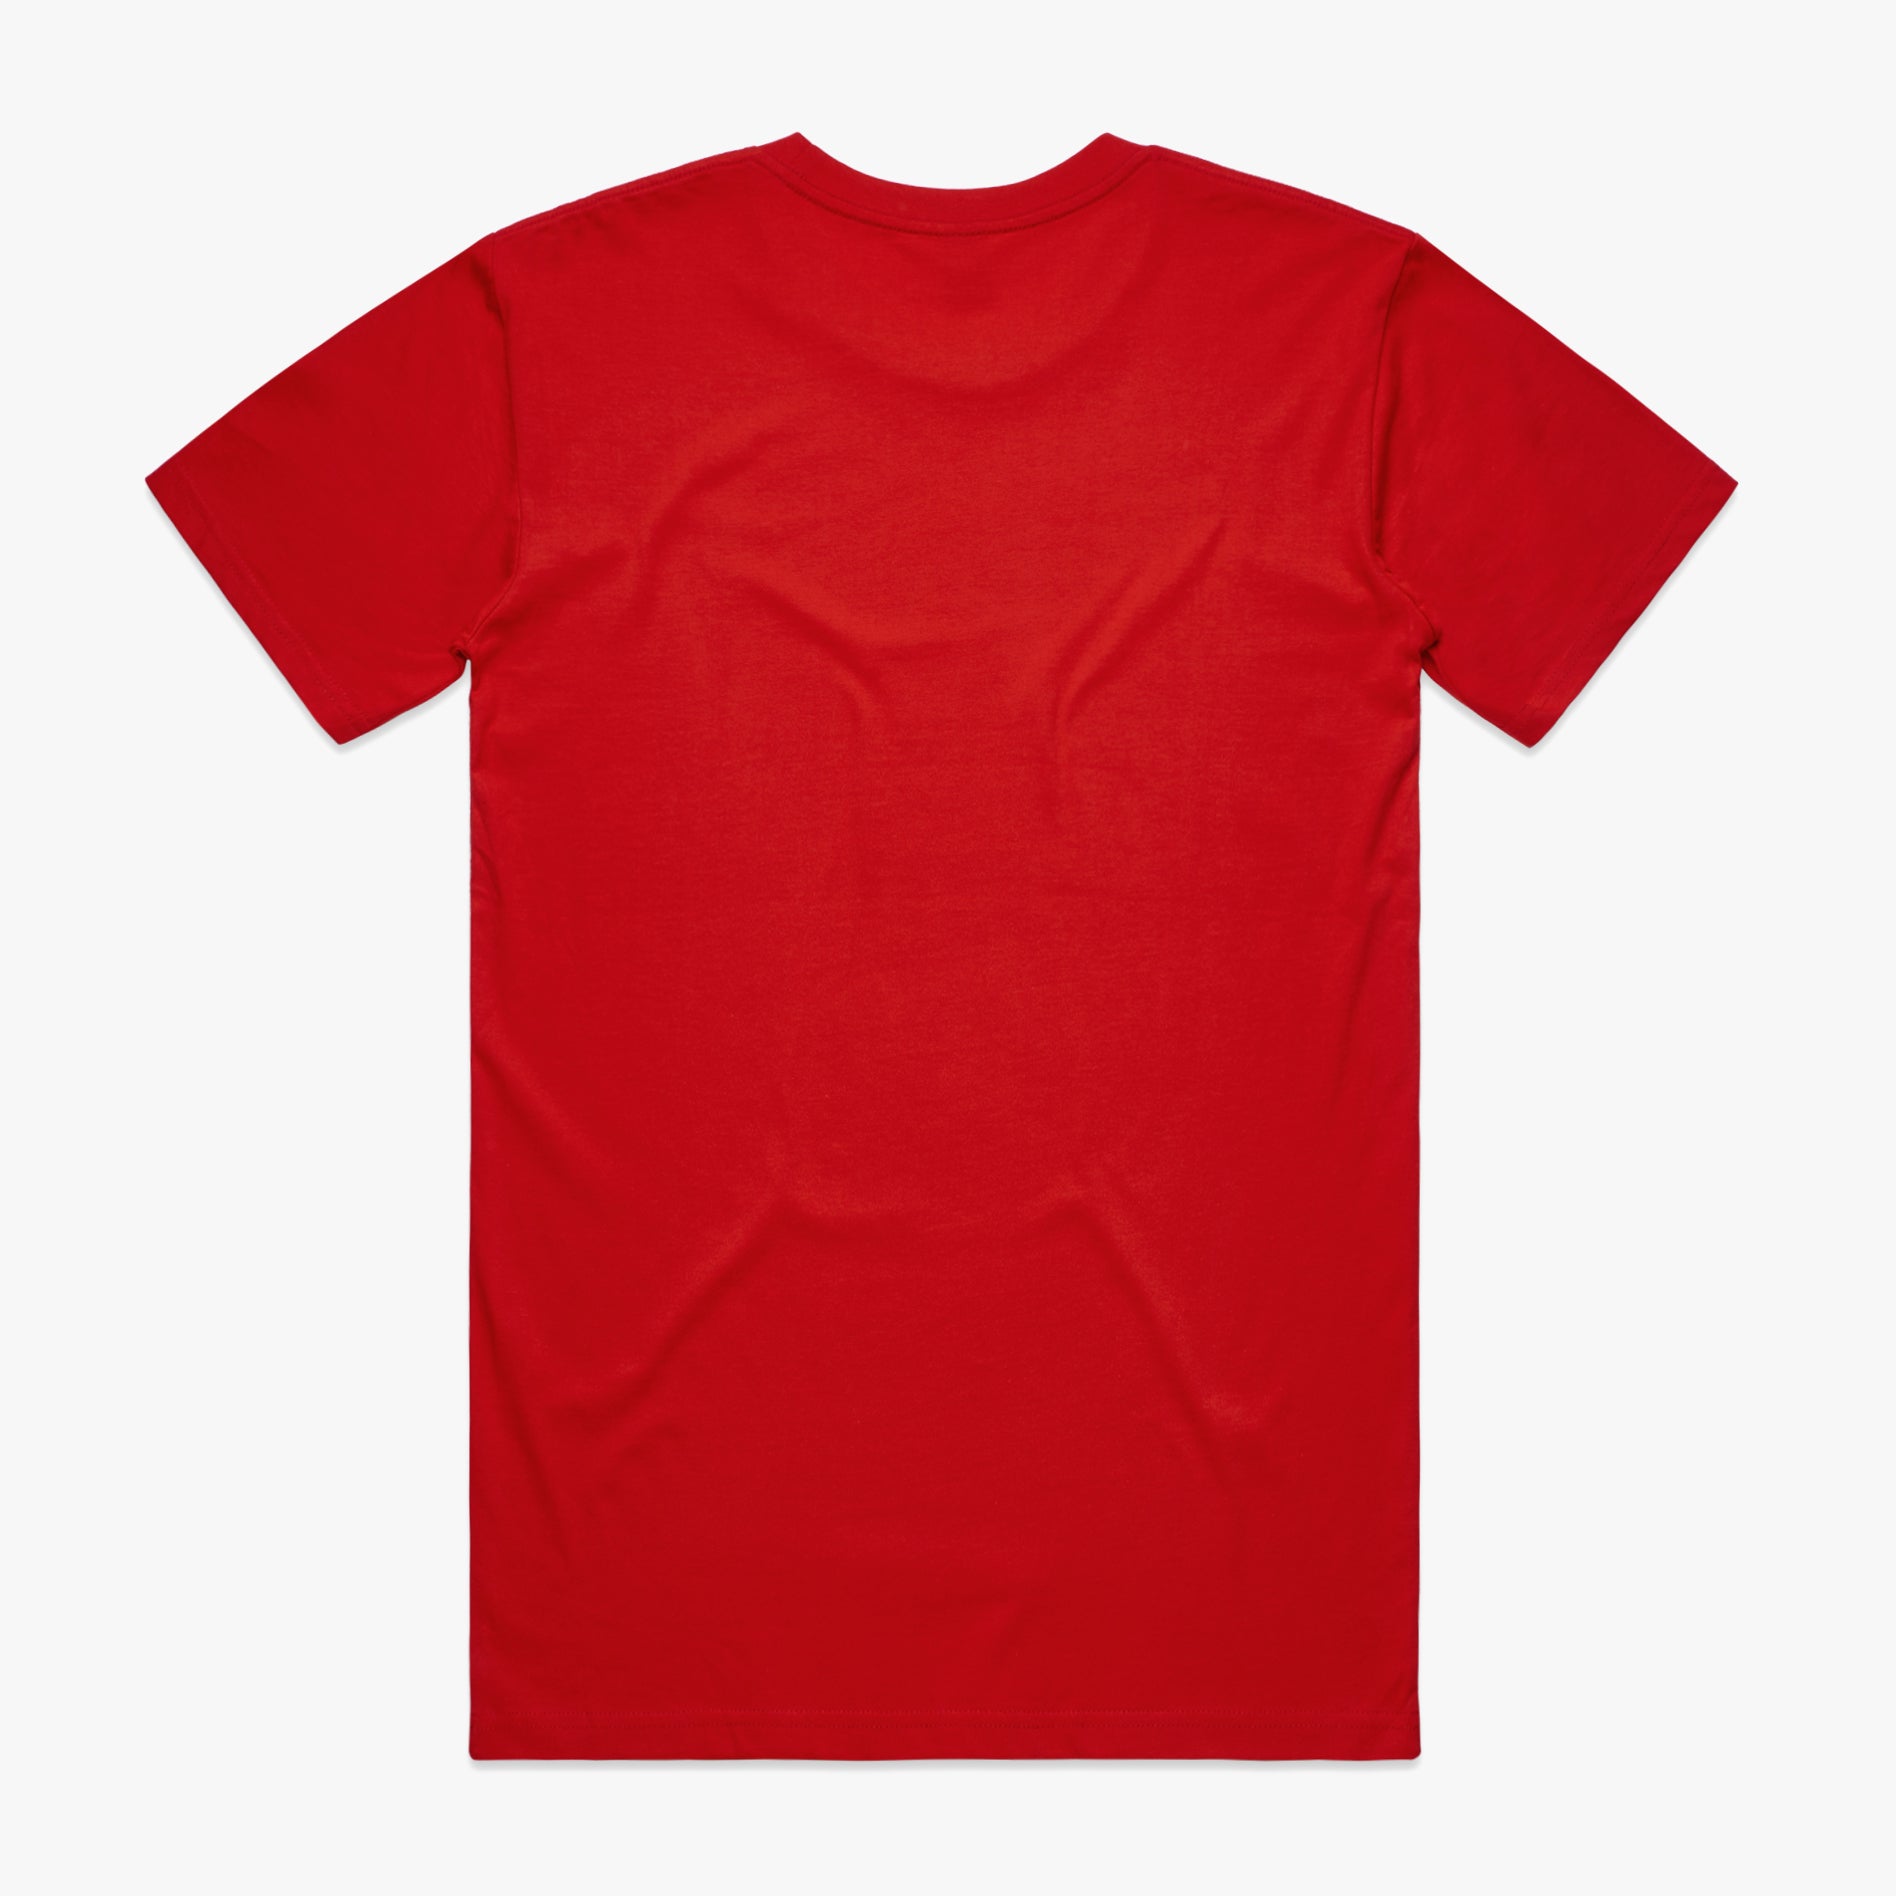 SHEEPEY OG Embroidered Tee Red